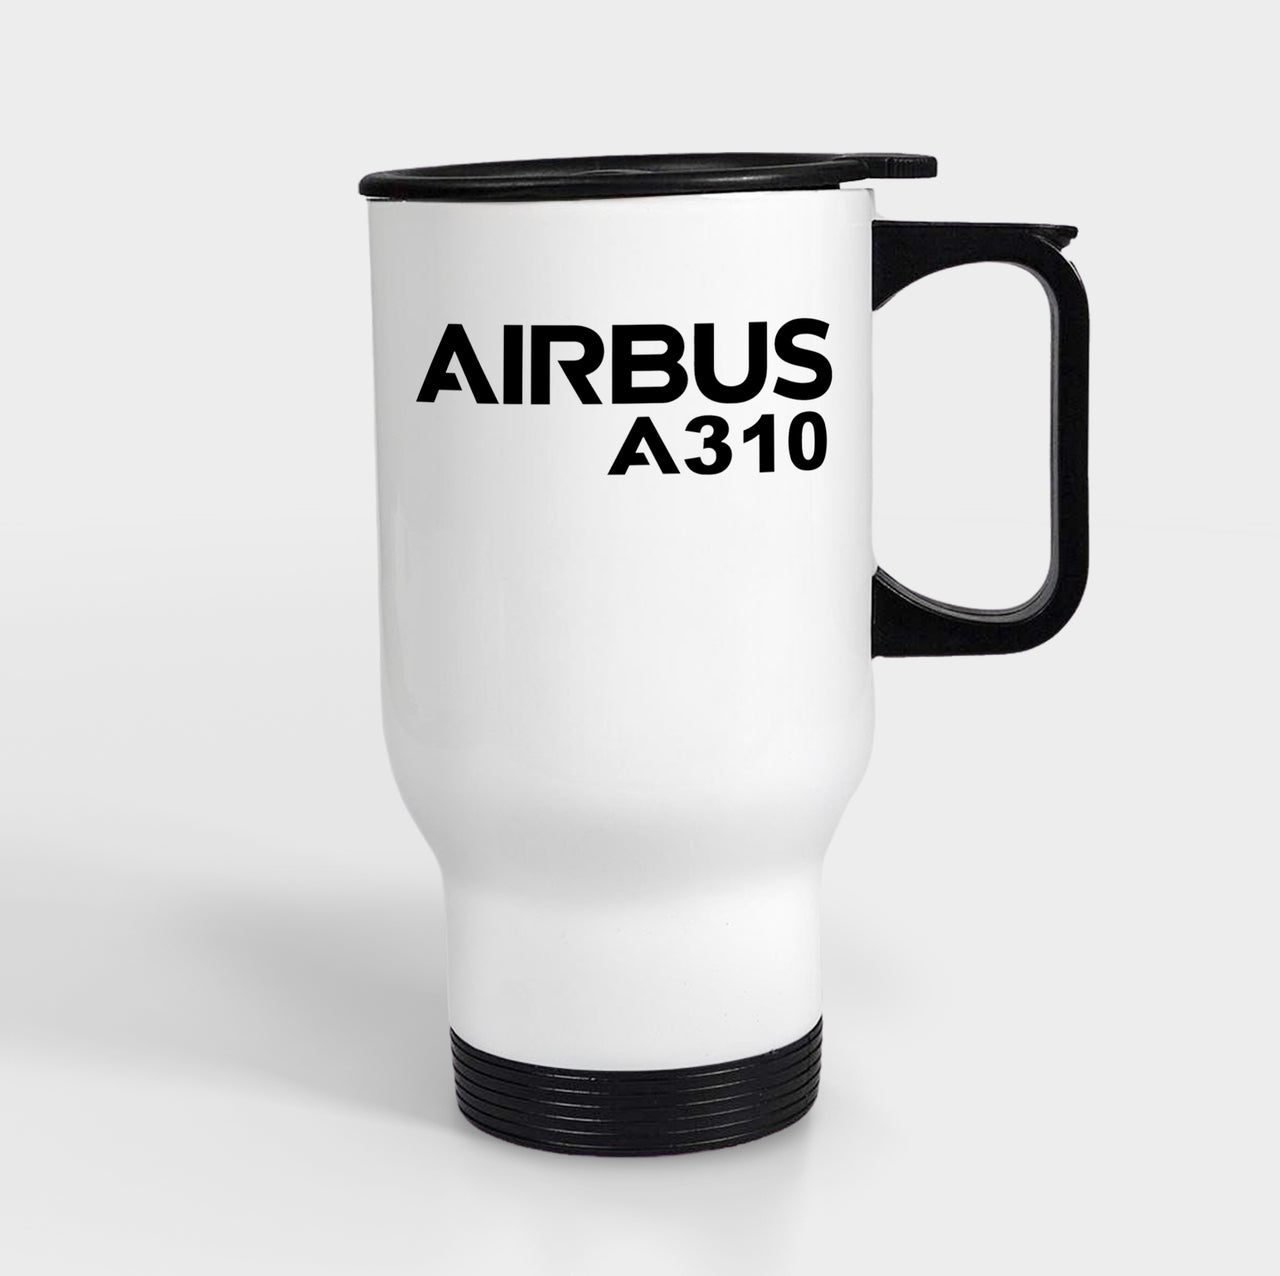 Airbus A319 & Text Designed Travel Mugs (With Holder)